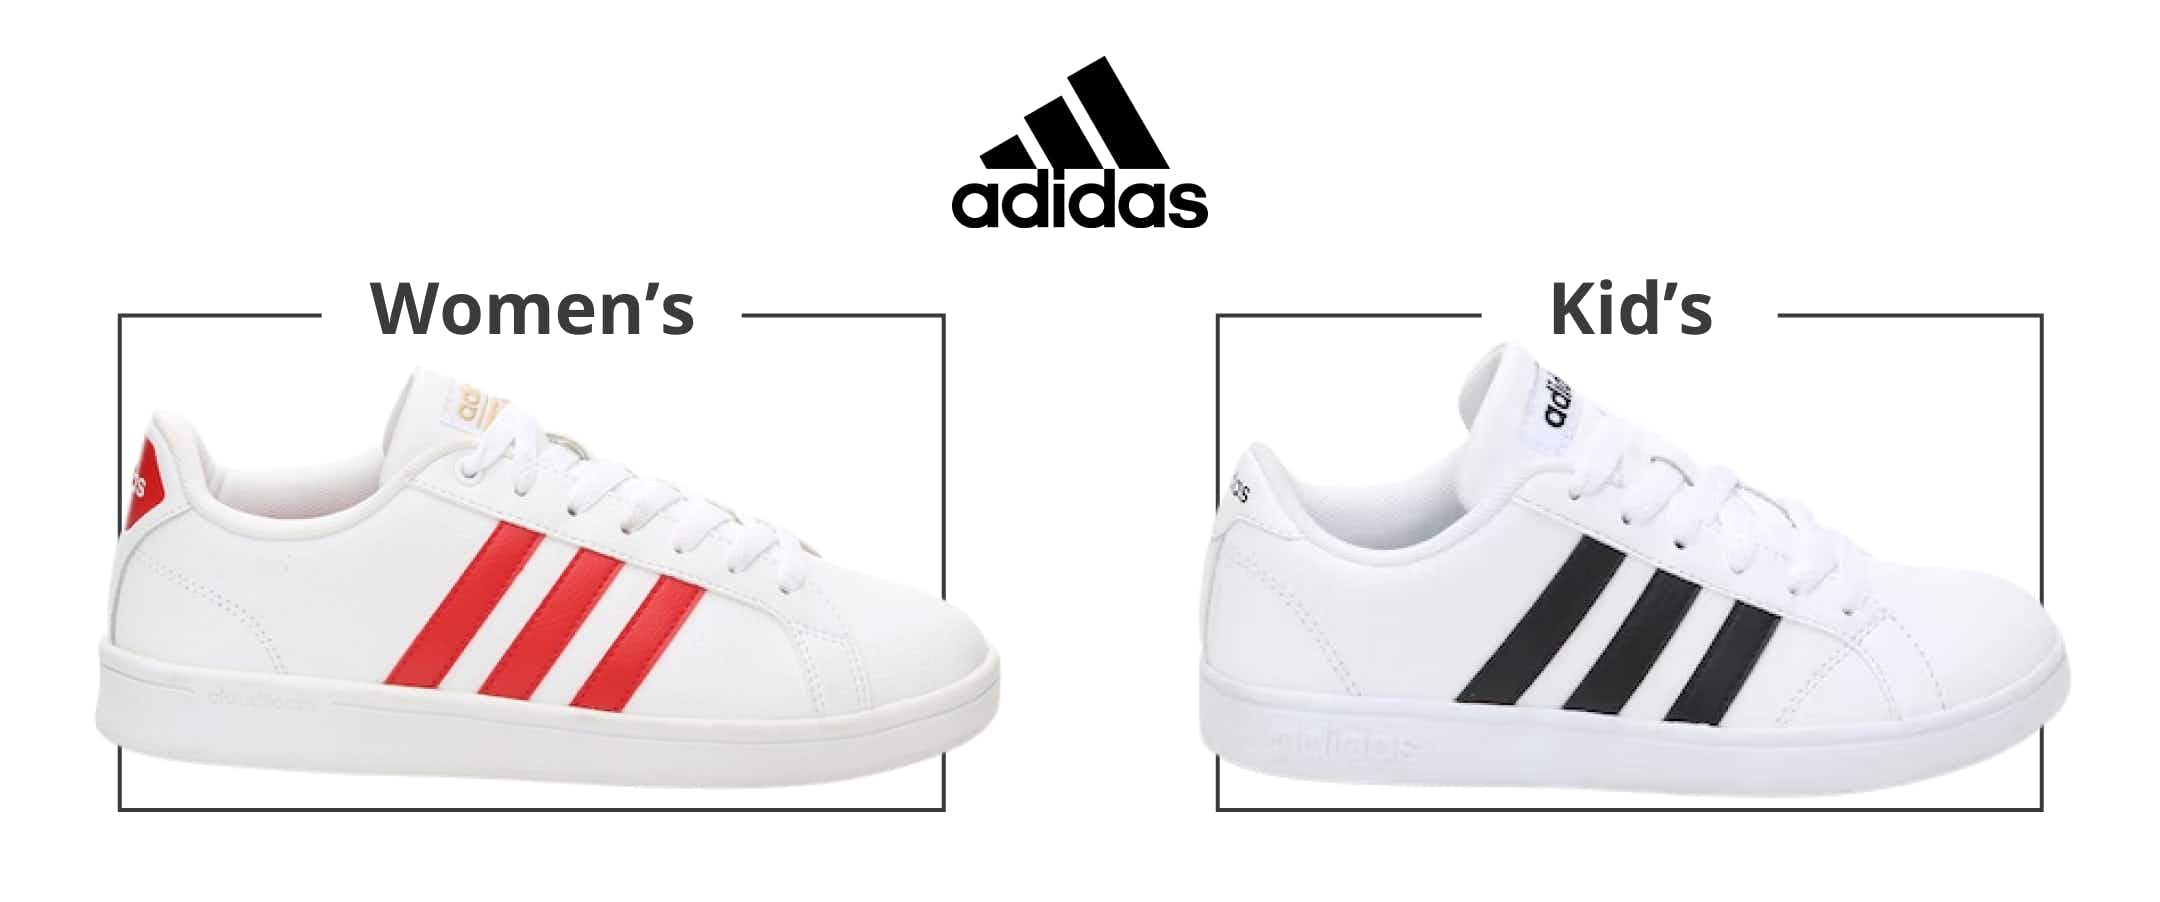 A comparison of a kid's and women's adidas shoe